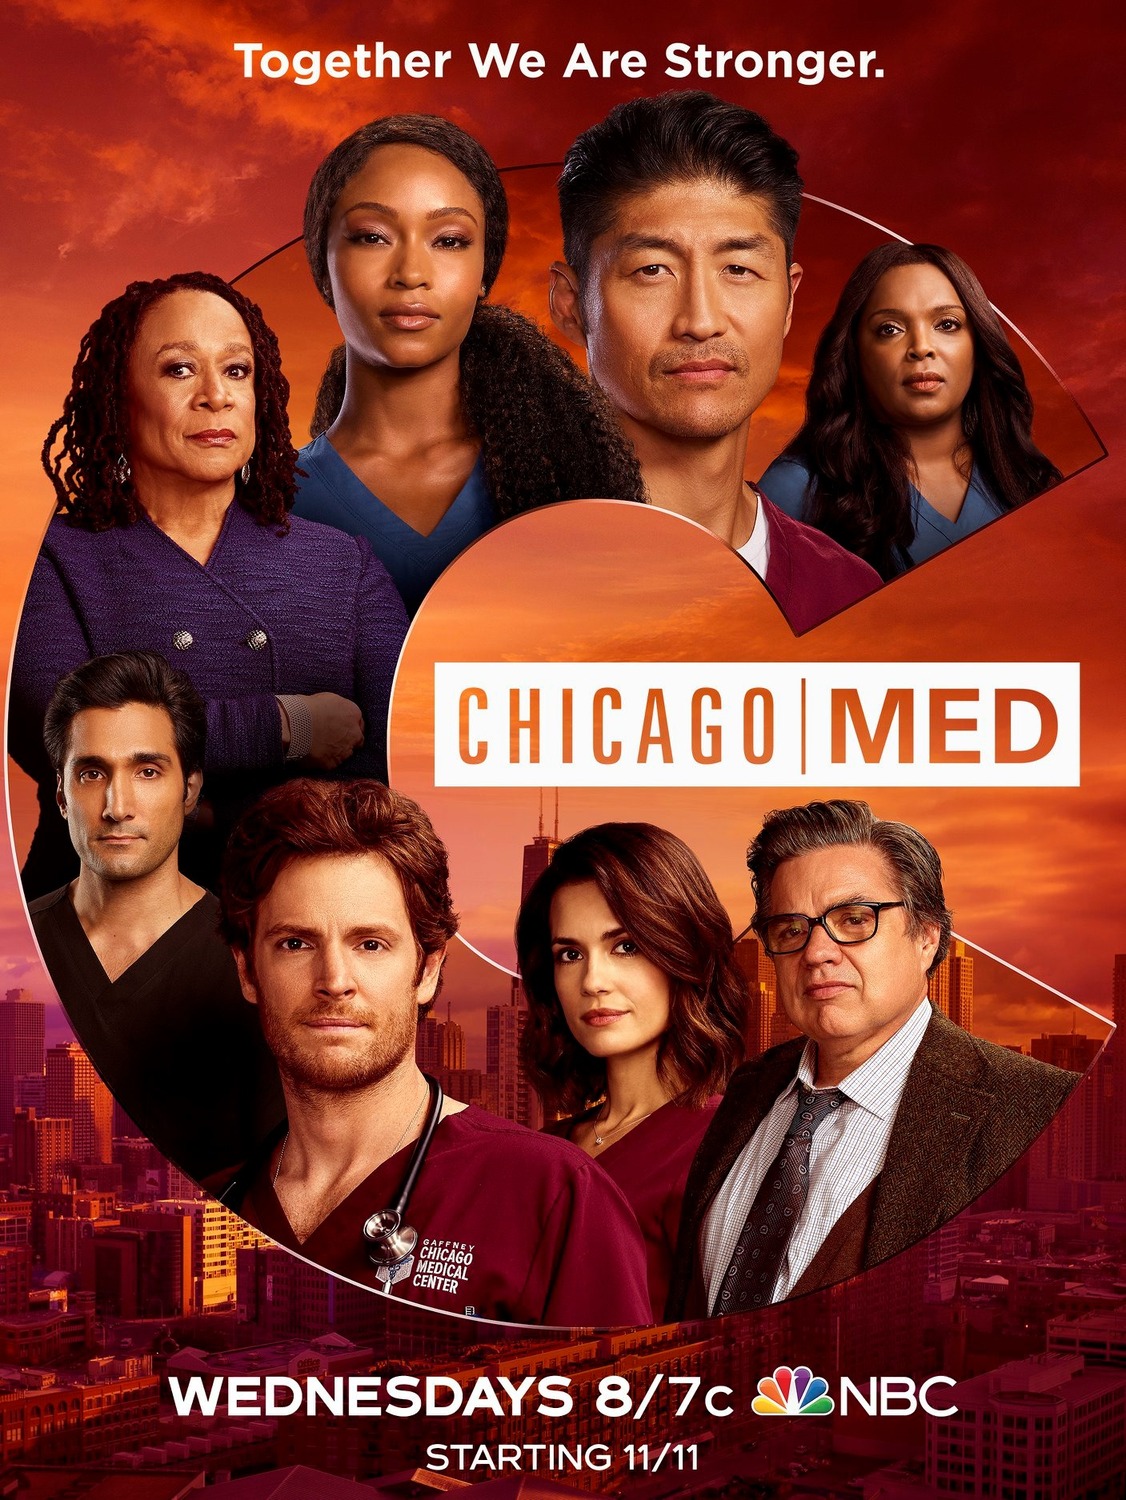 Chicago Med (3 of 4) Extra Large Movie Poster Image IMP Awards